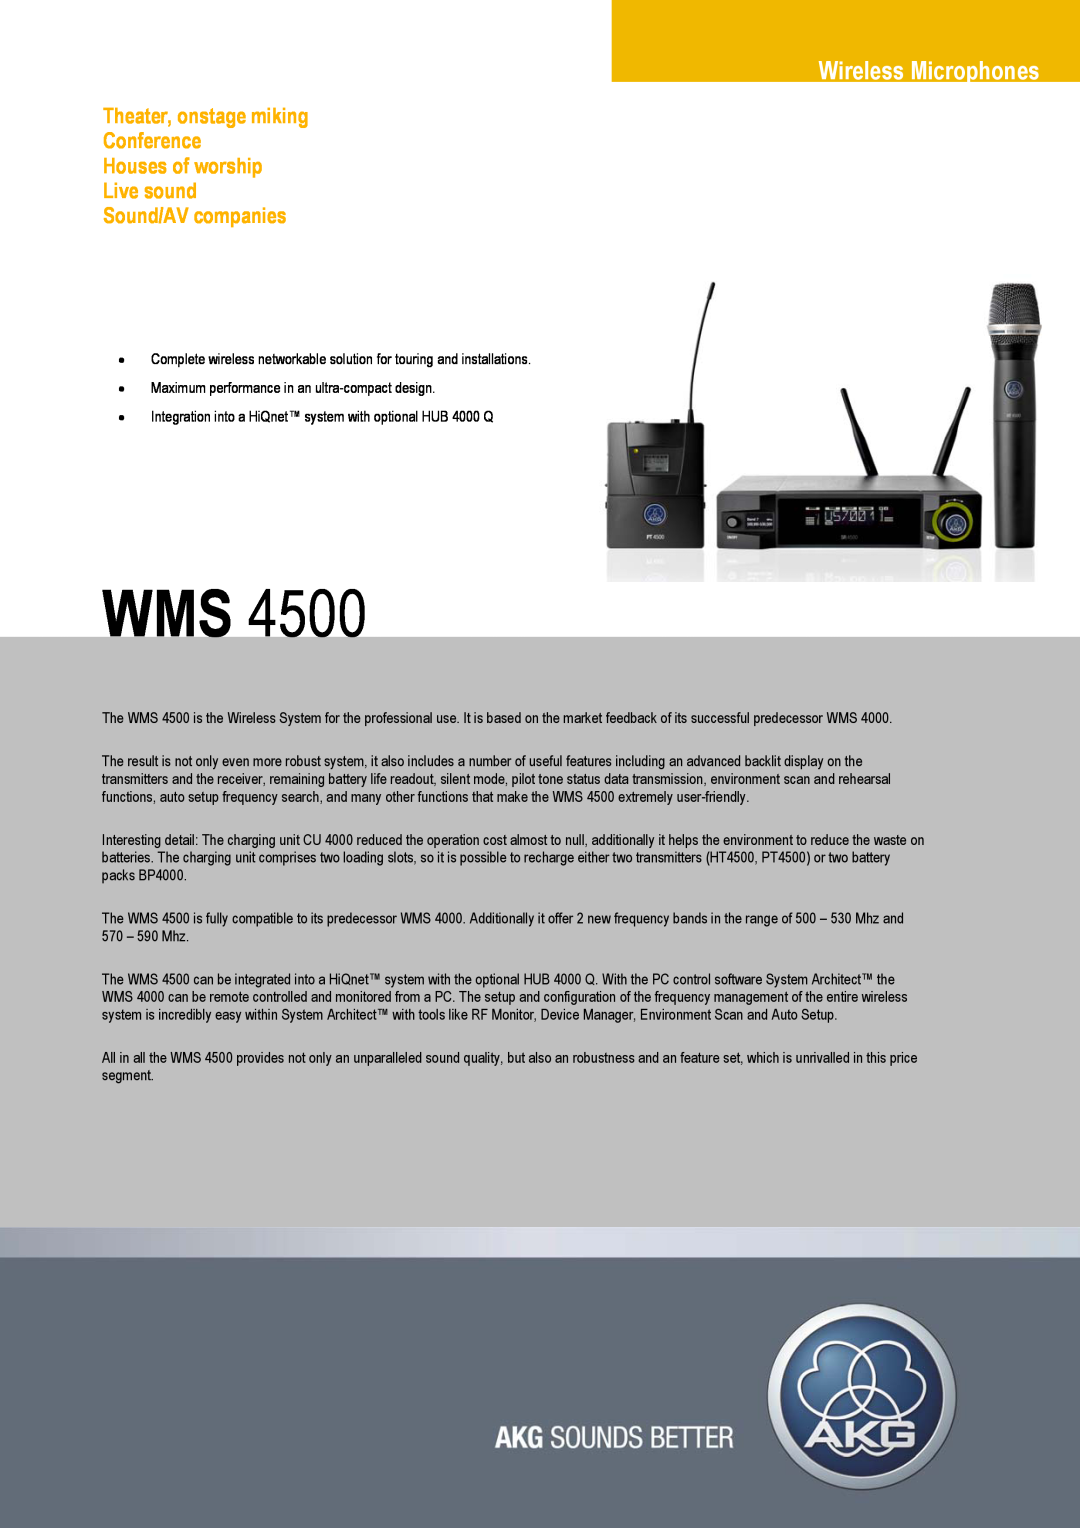 AKG Acoustics WMS 4500 manual Wireless Microphones, Theater, onstage miking Conference Houses of worship Live sound 